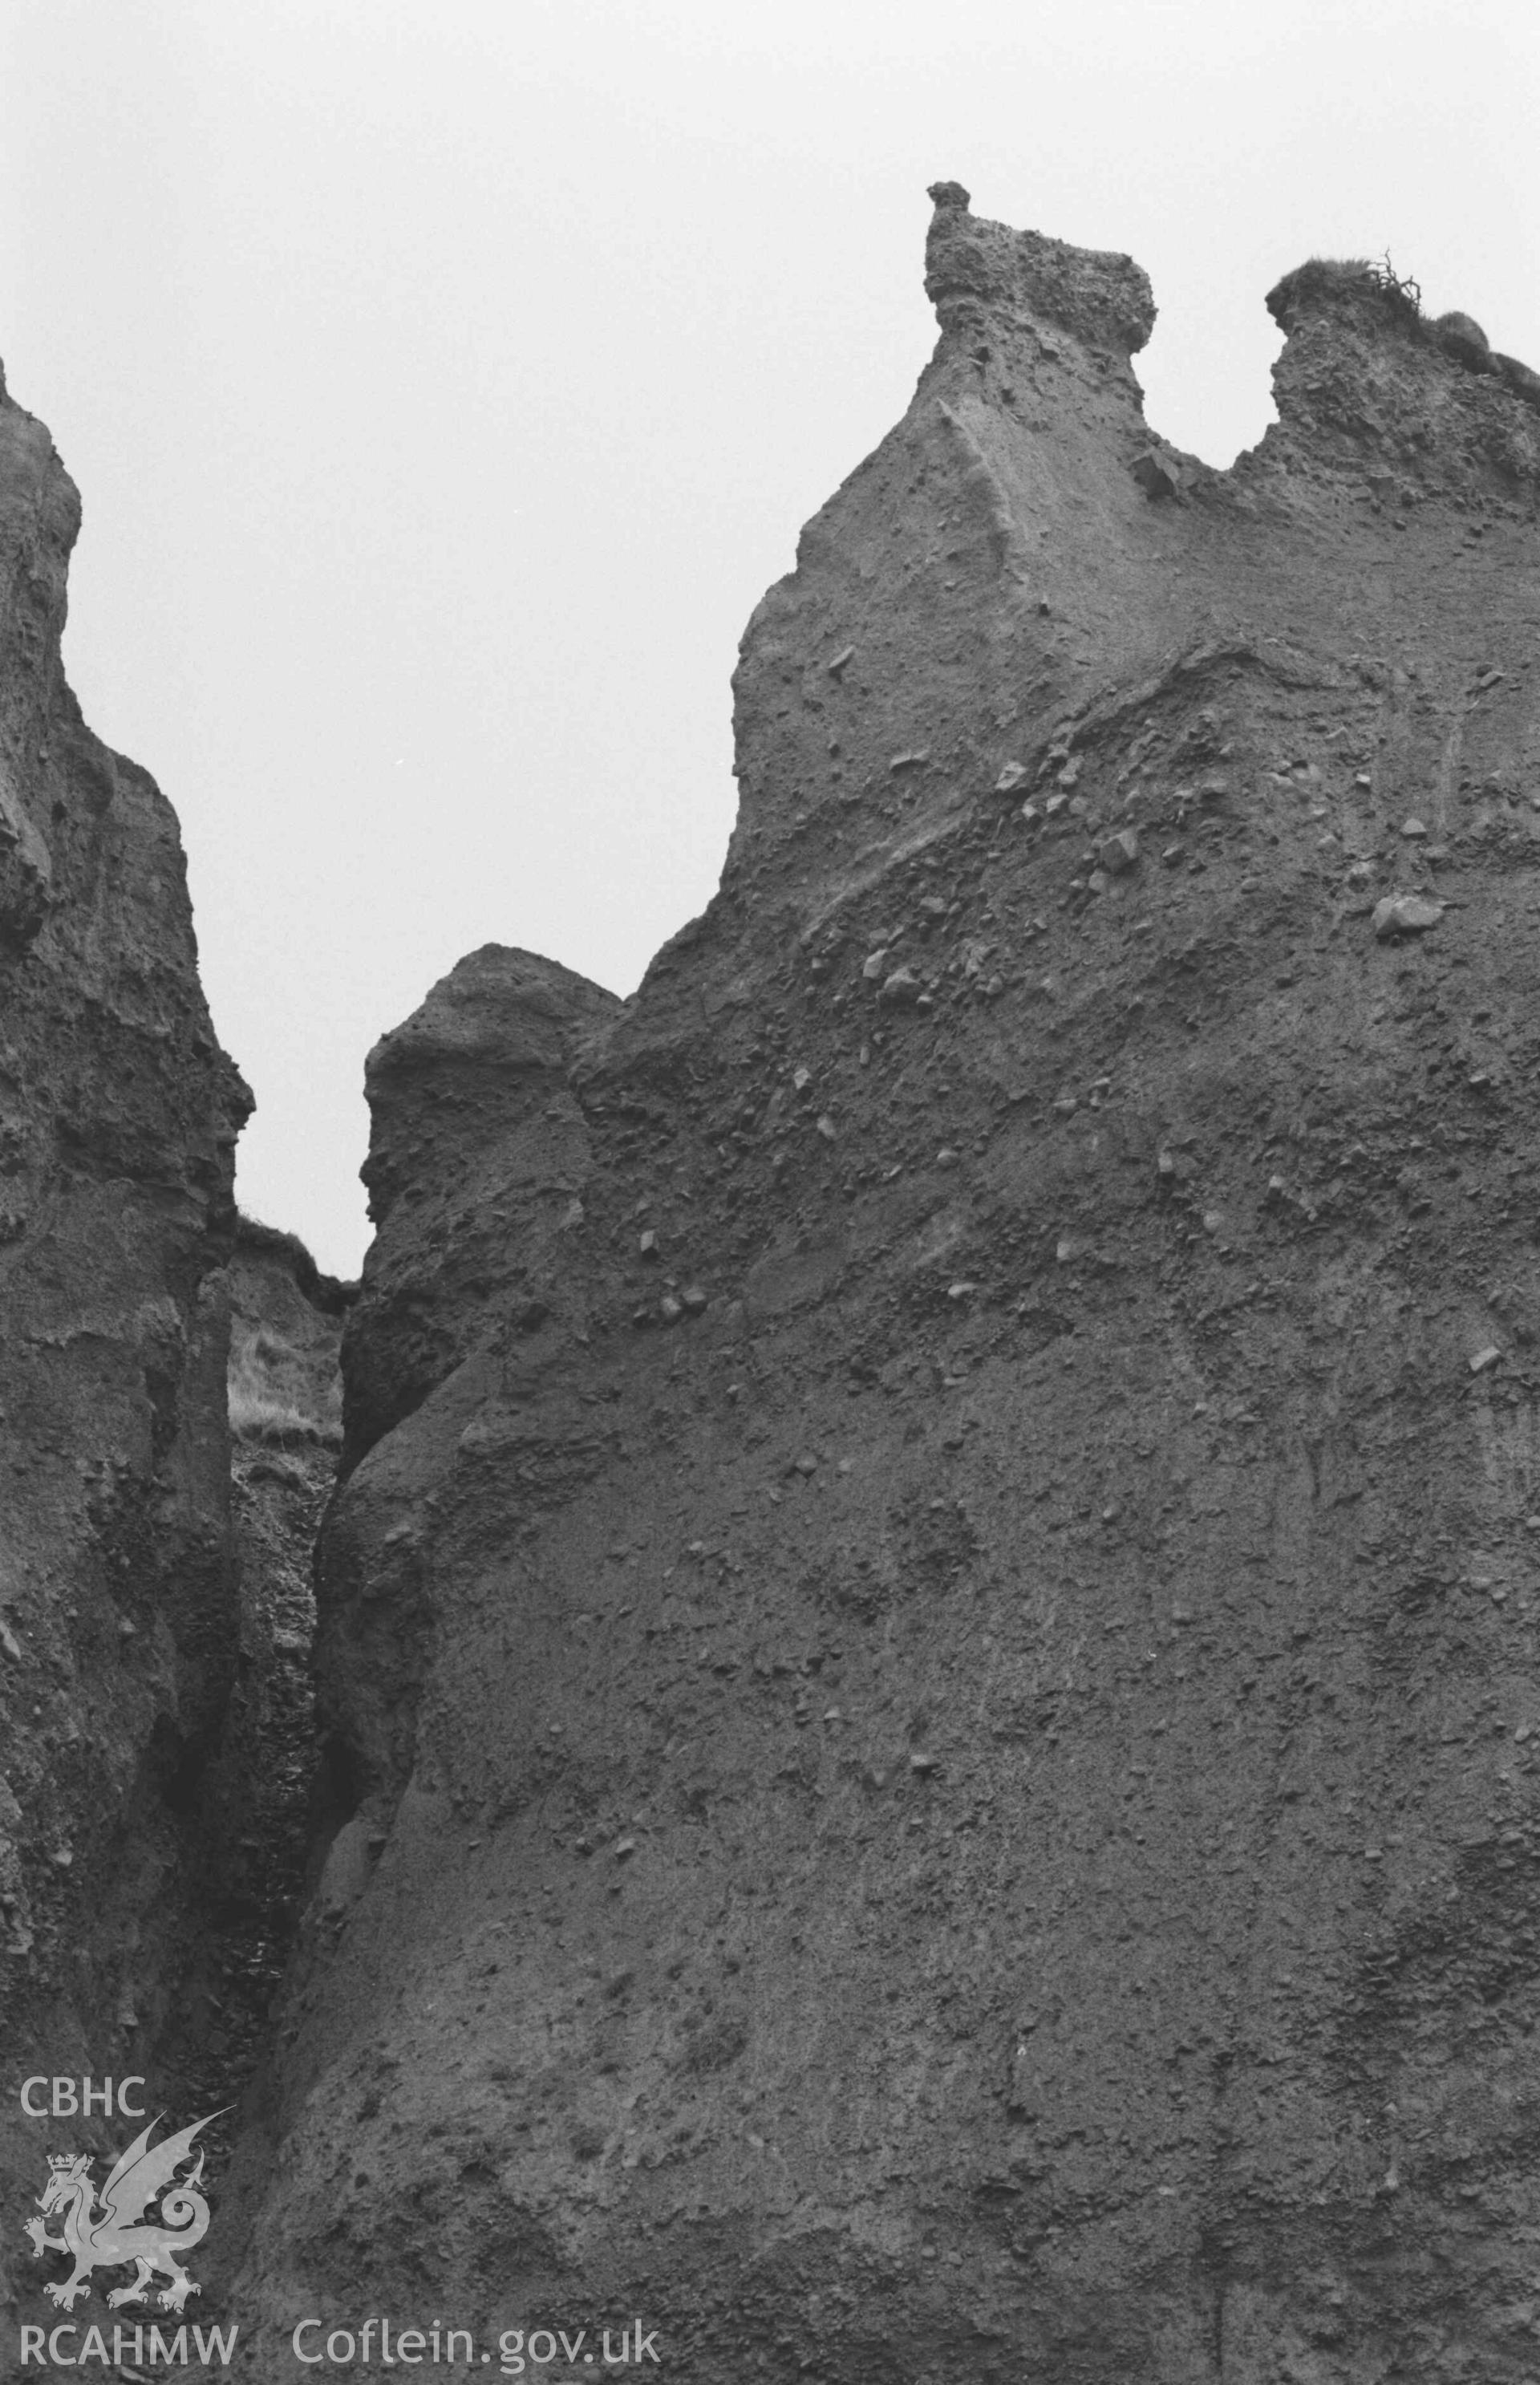 Digital copy of a black and white negative showing eroded boulder clay cliffs 100m north east of the mouth of the Afon Cwinten. Photographed by Arthur Chater on 3 January 1969. Looking south east from Grid Reference SN 436 614.